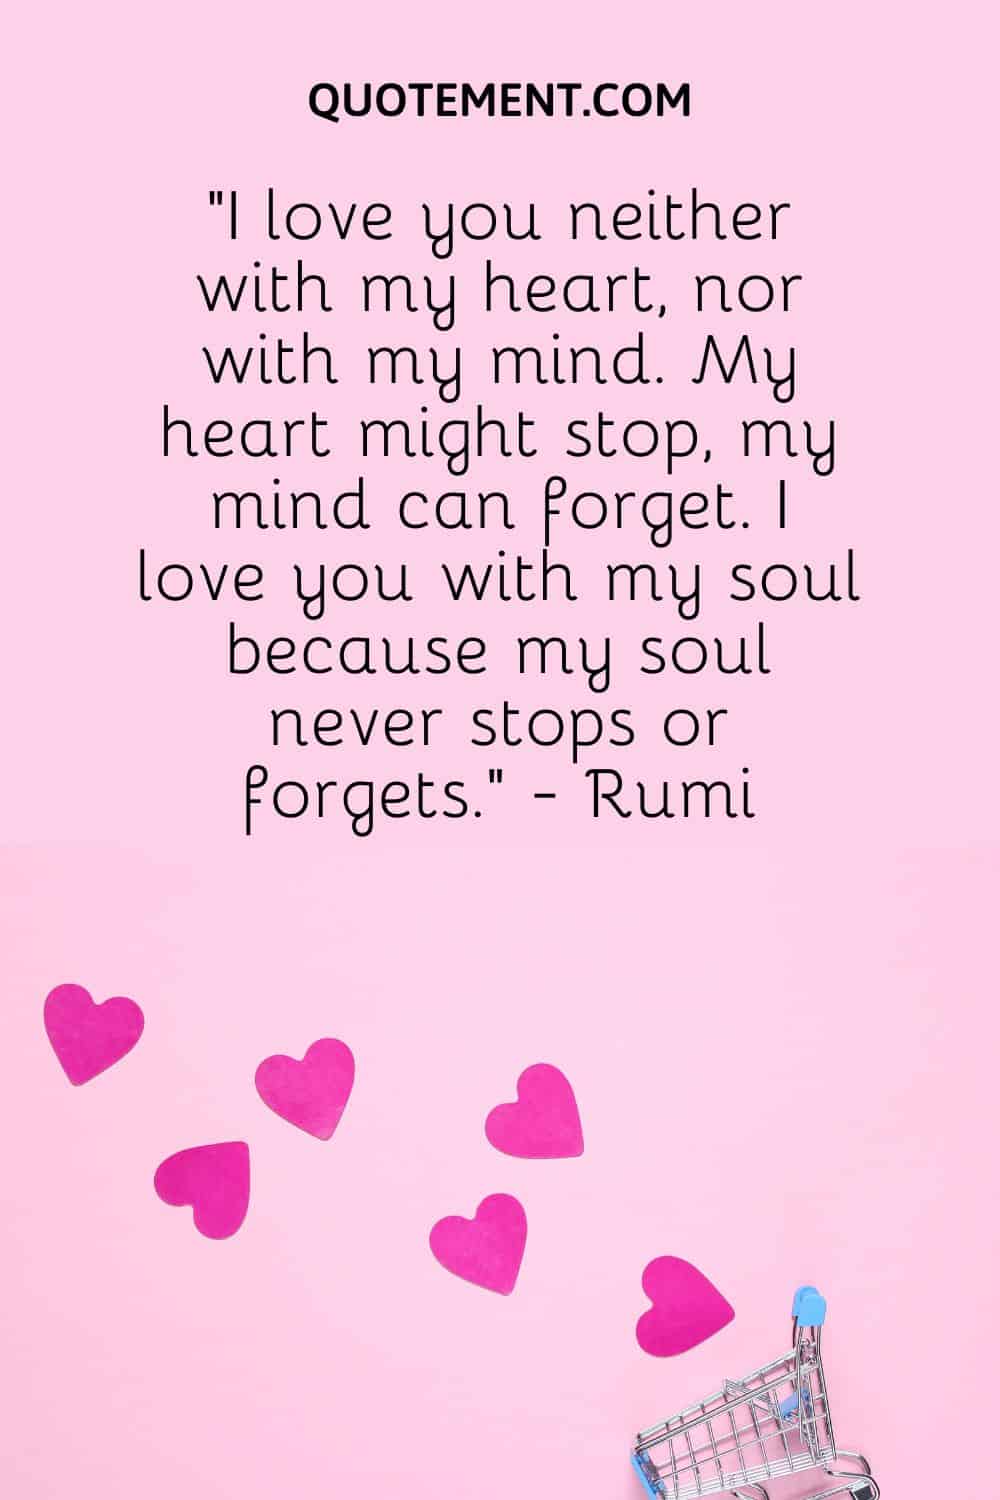 “I love you neither with my heart, nor with my mind. My heart might stop, my mind can forget. I love you with my soul because my soul never stops or forgets.” - Rumi